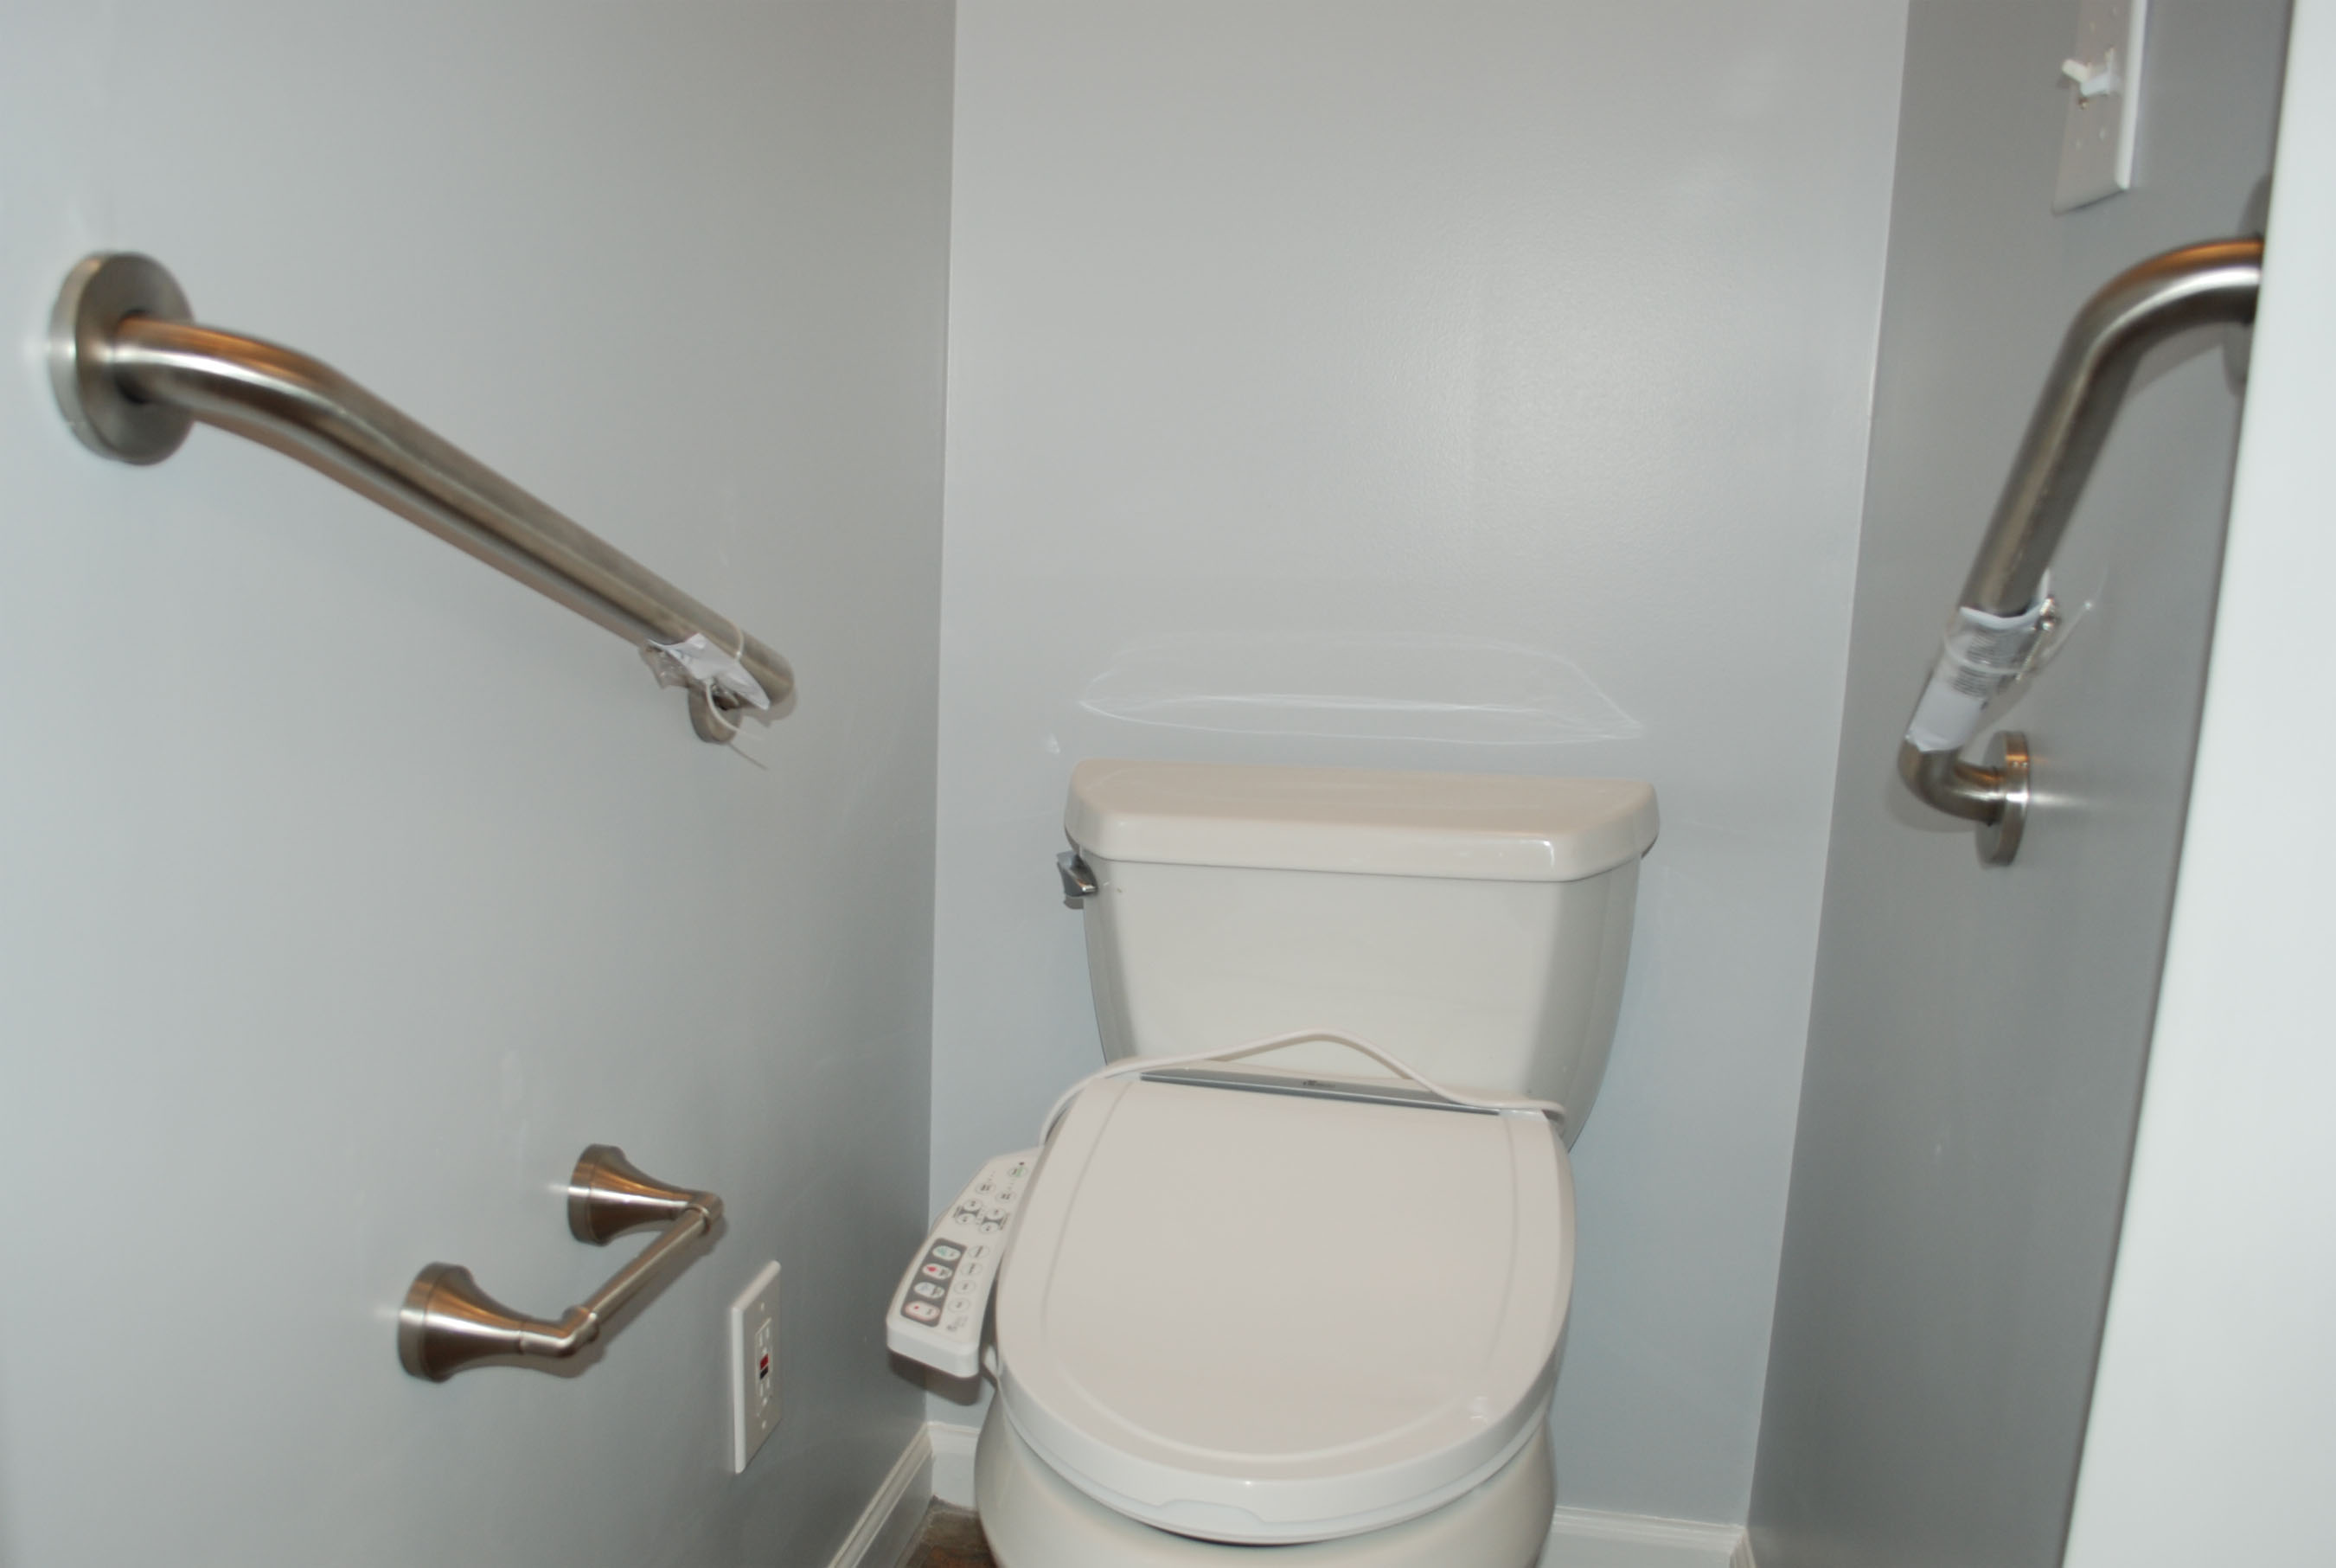 bathroom toliet with guard rails